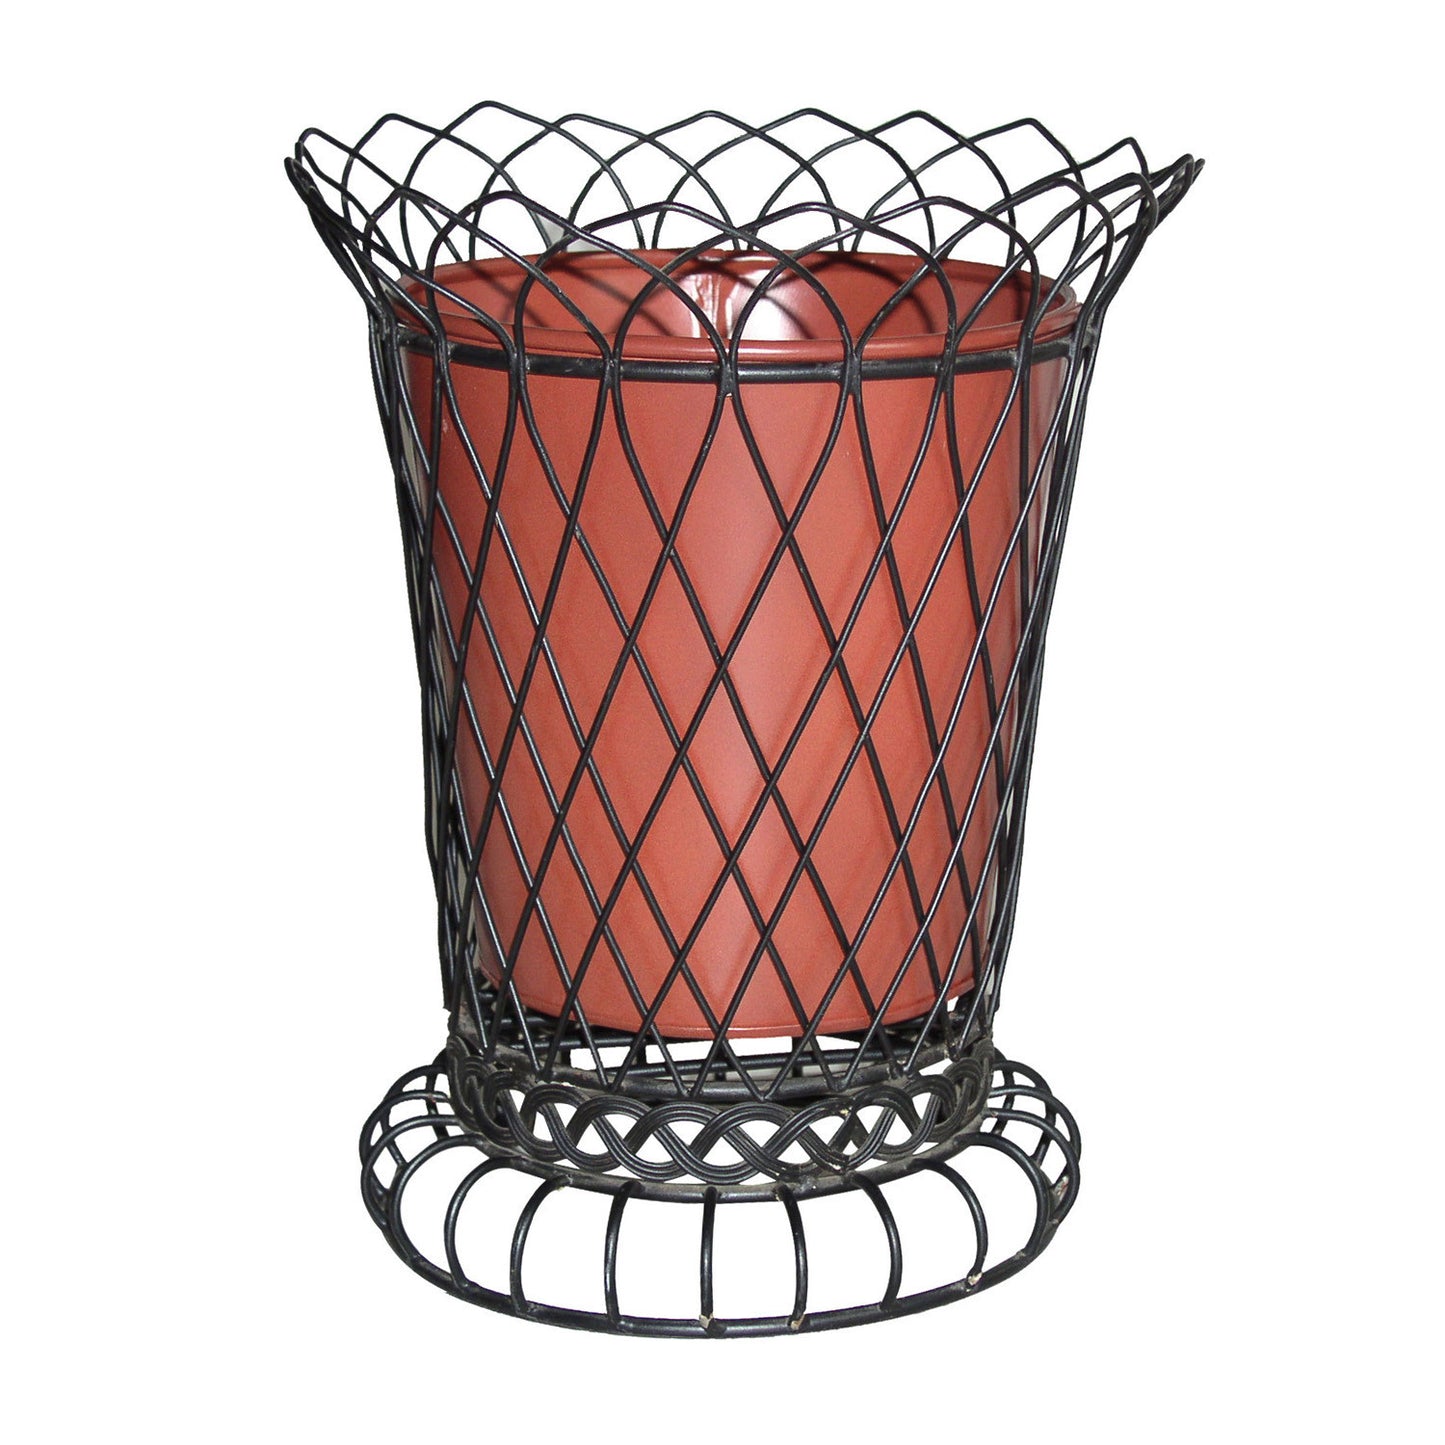 GiftBay 807-BR Tall Wire & Pot Black & Red Container / Vase 11" High. Very Unique and Strongly Built for Multi- Purpose Use